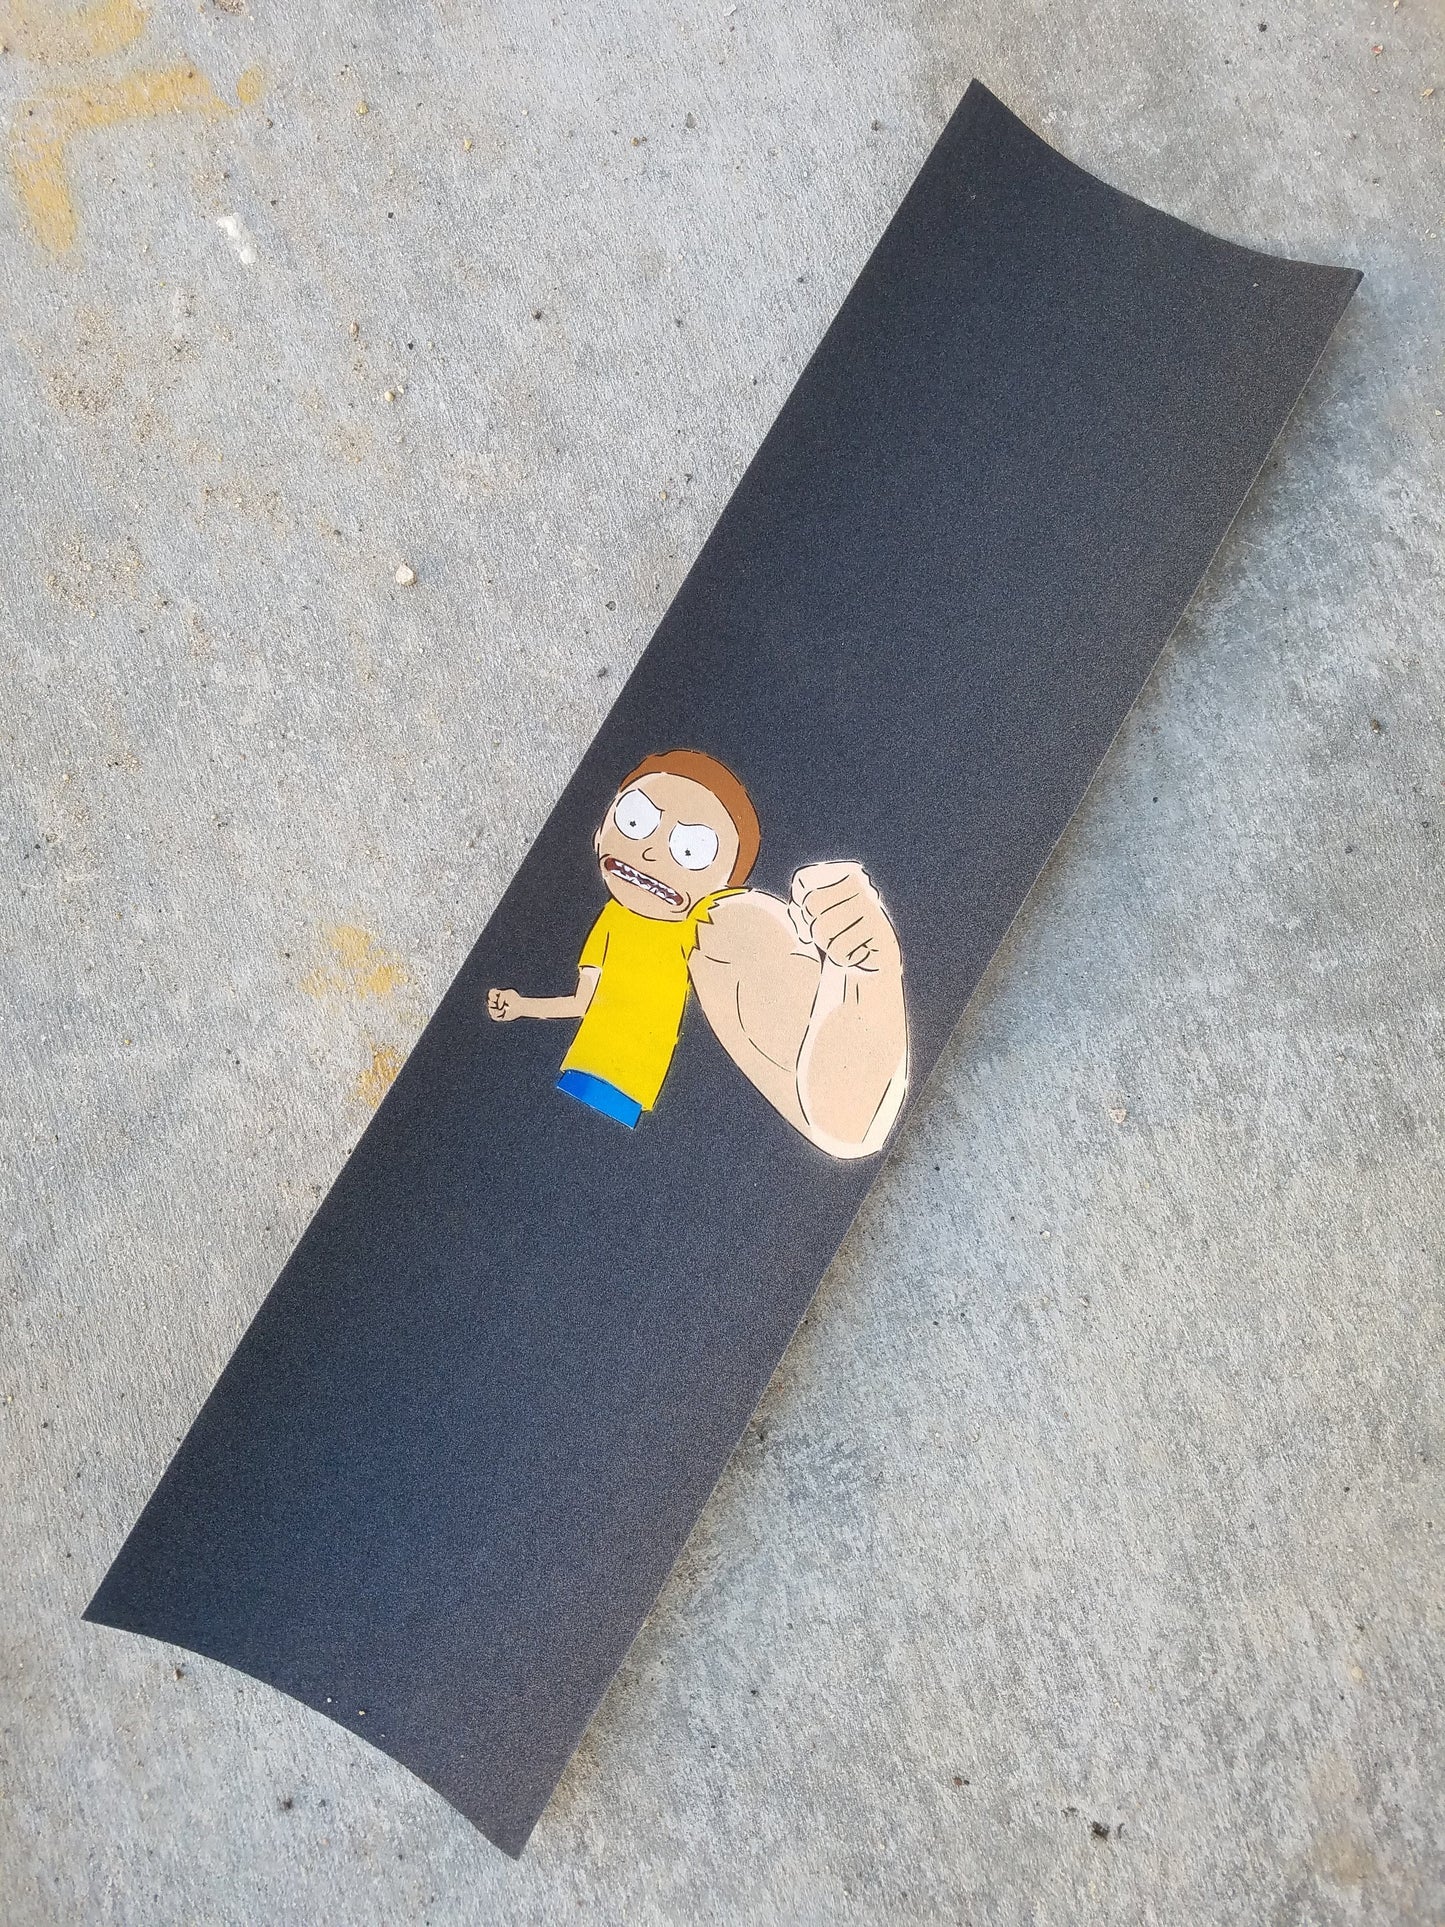 Stenciled Grip - Morty Muscles (Rick & Morty)